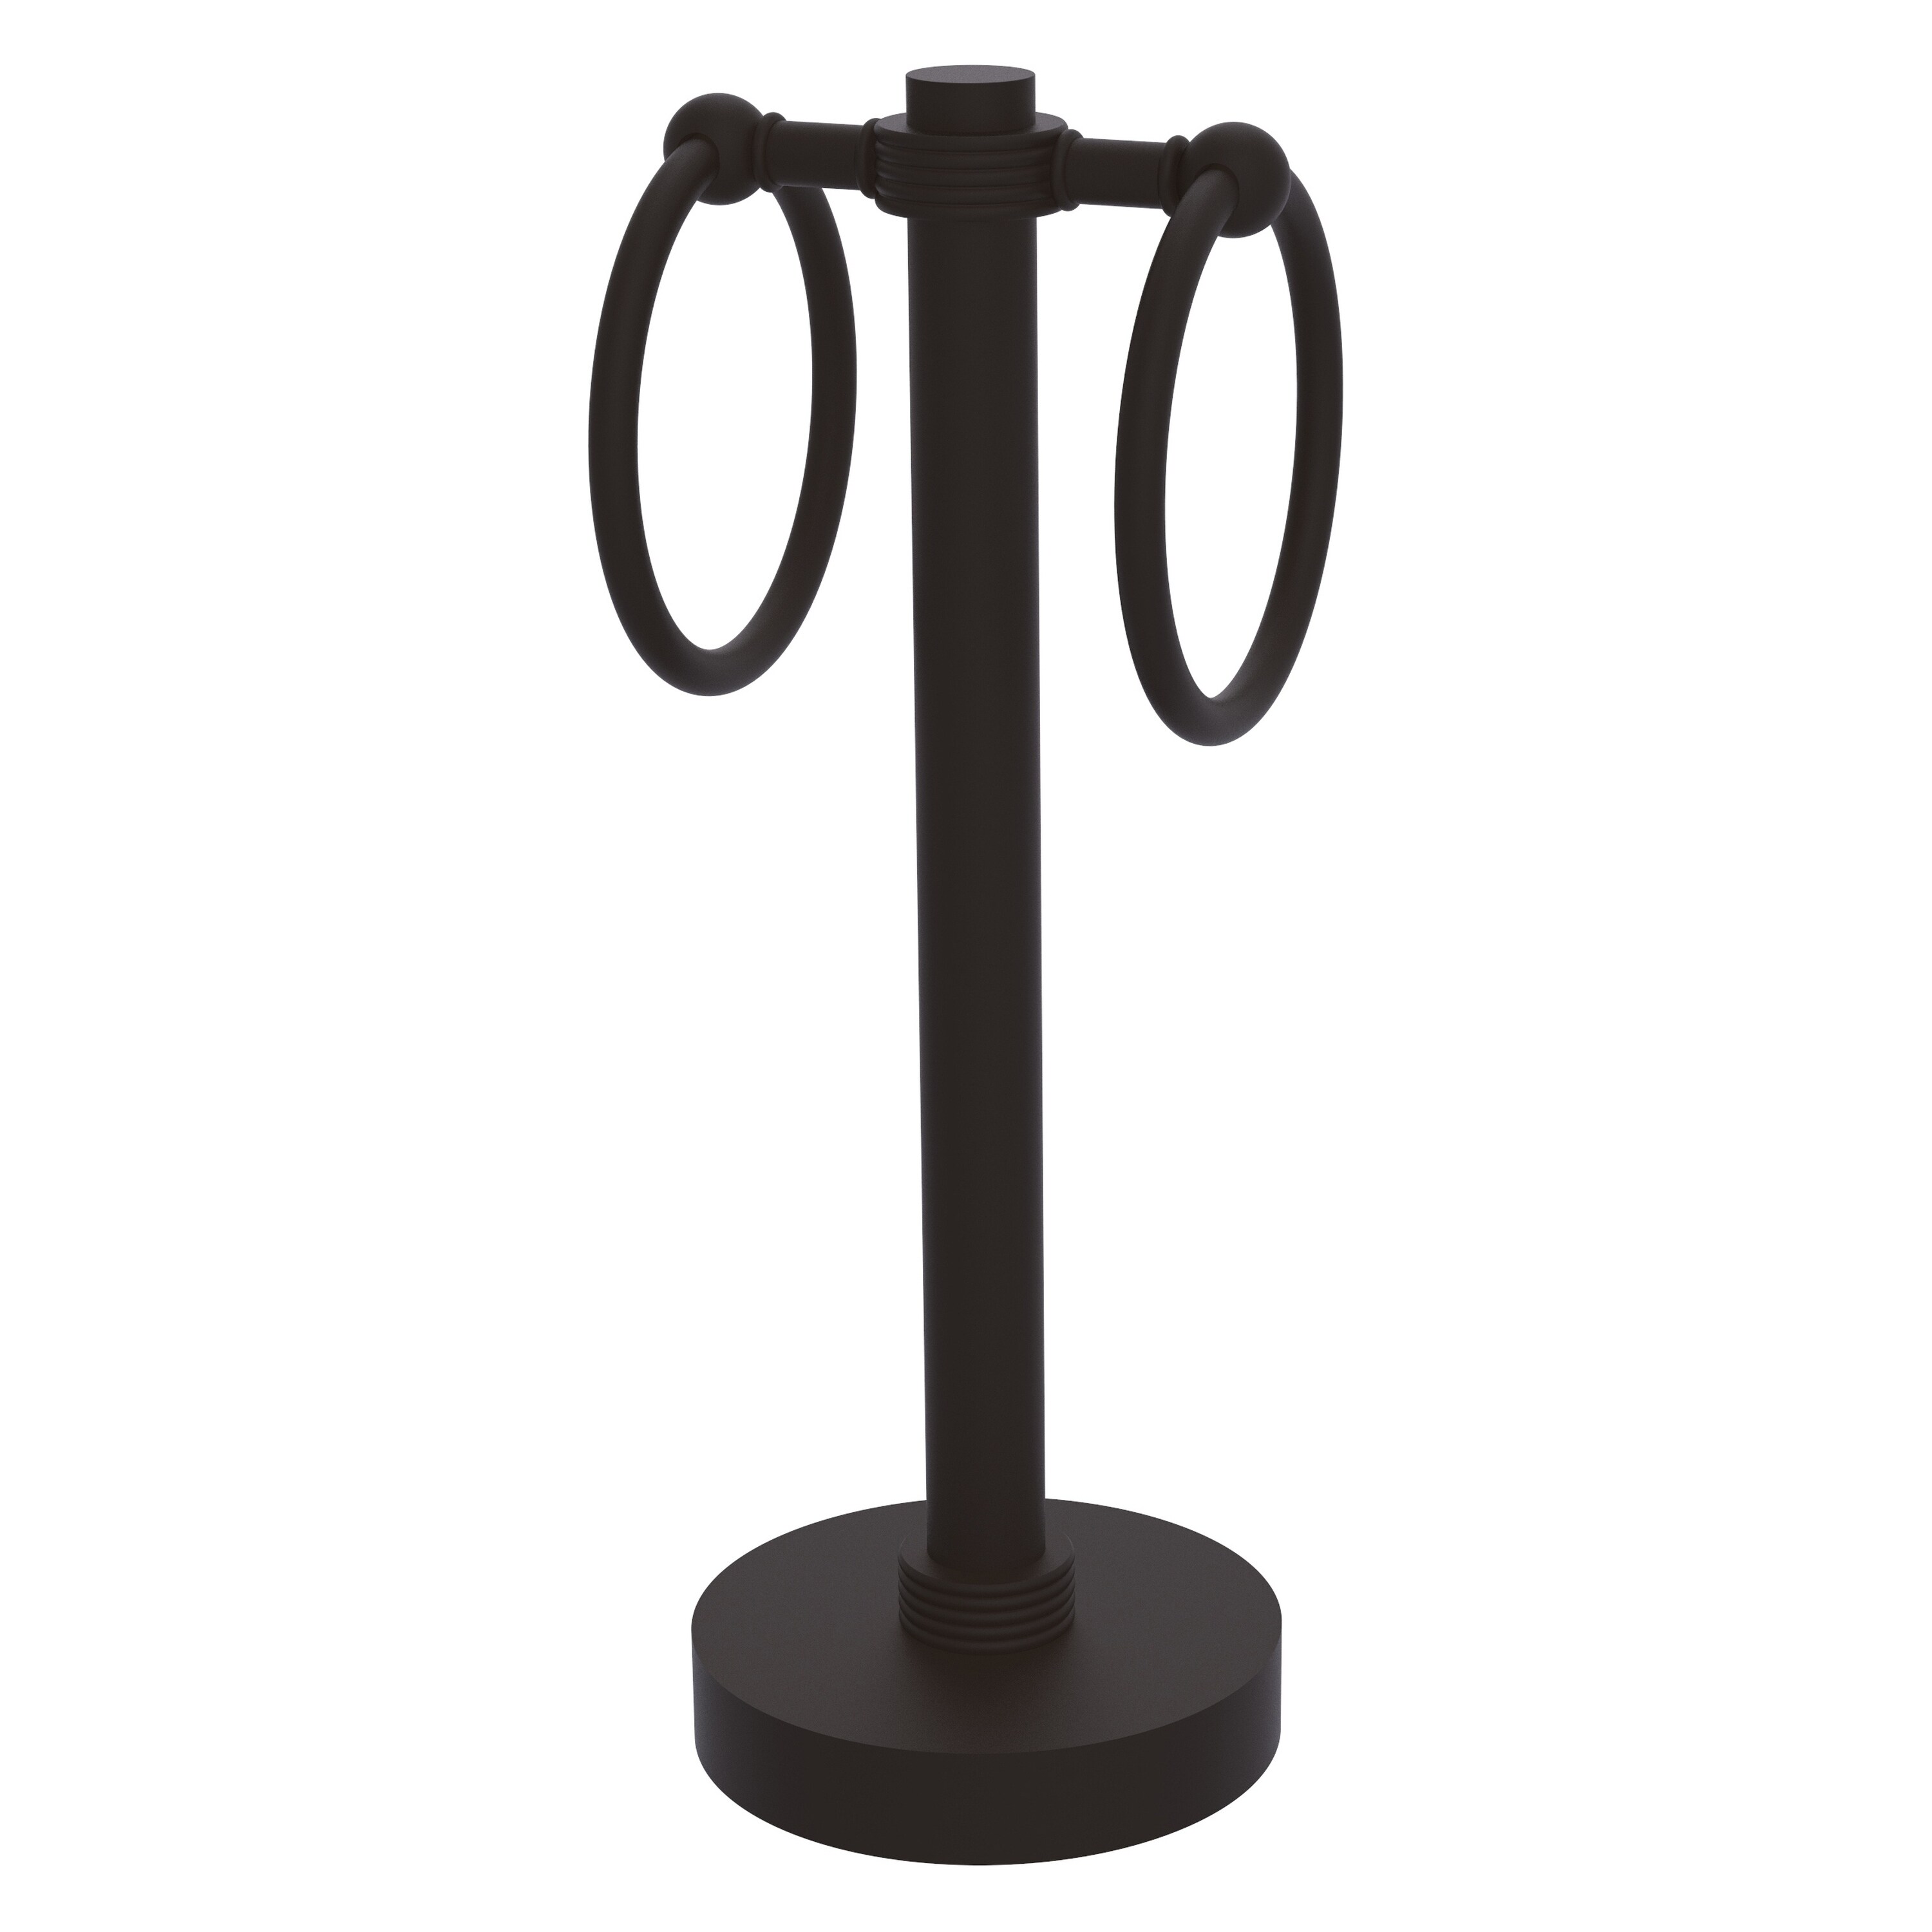 Oil-Rubbed Bronze Freestanding Countertop Double Towel Ring | - Allied Brass 953G-ORB